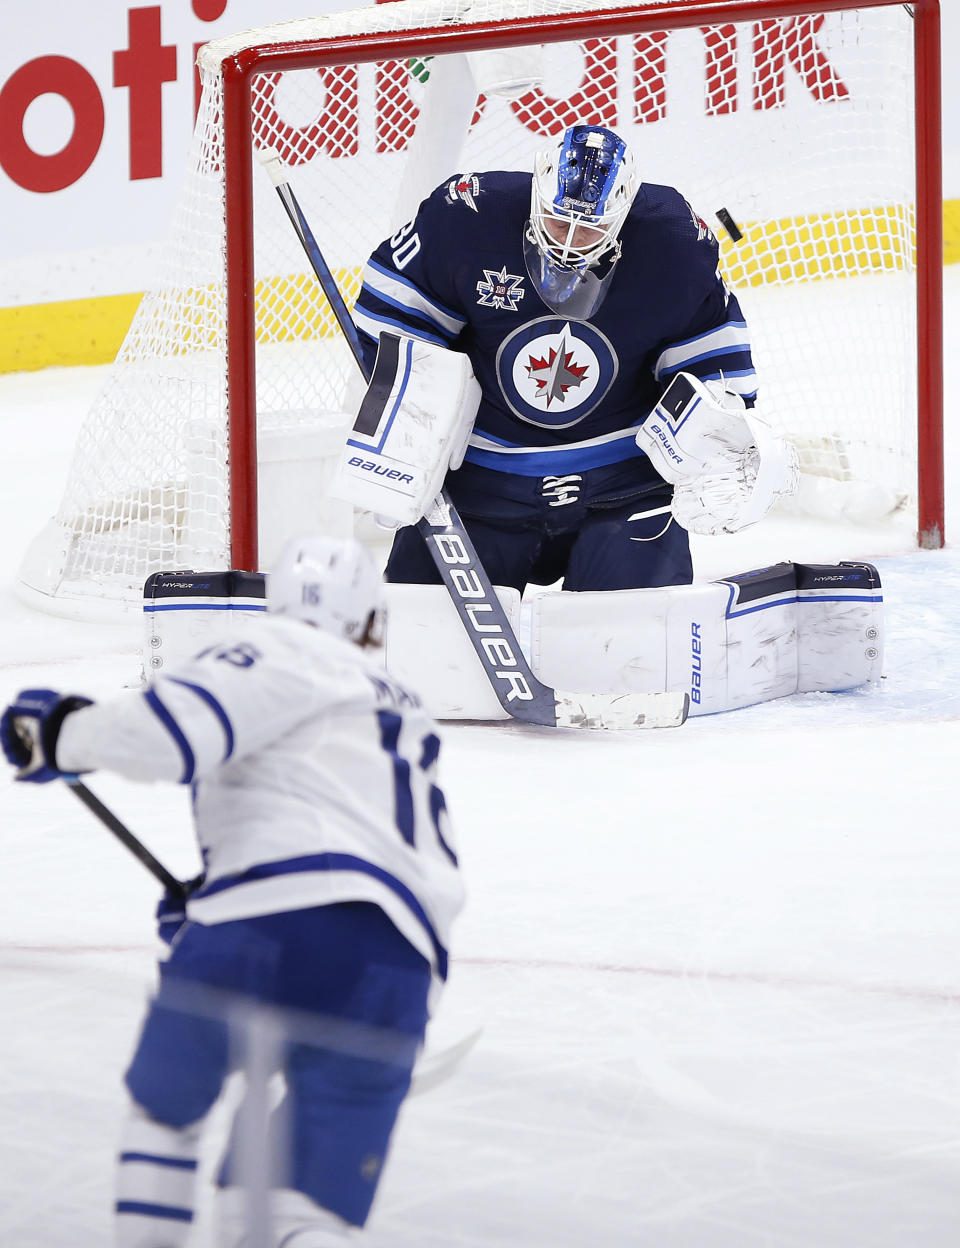 Toronto Maple Leafs' Mitchell Marner (16) scores on Winnipeg Jets goaltender Laurent Brossoit (30) during the second period of an NHL hockey game Thursday, April 22, 2021, in Winnipeg, Manitoba. (John Woods/The Canadian Press via AP)